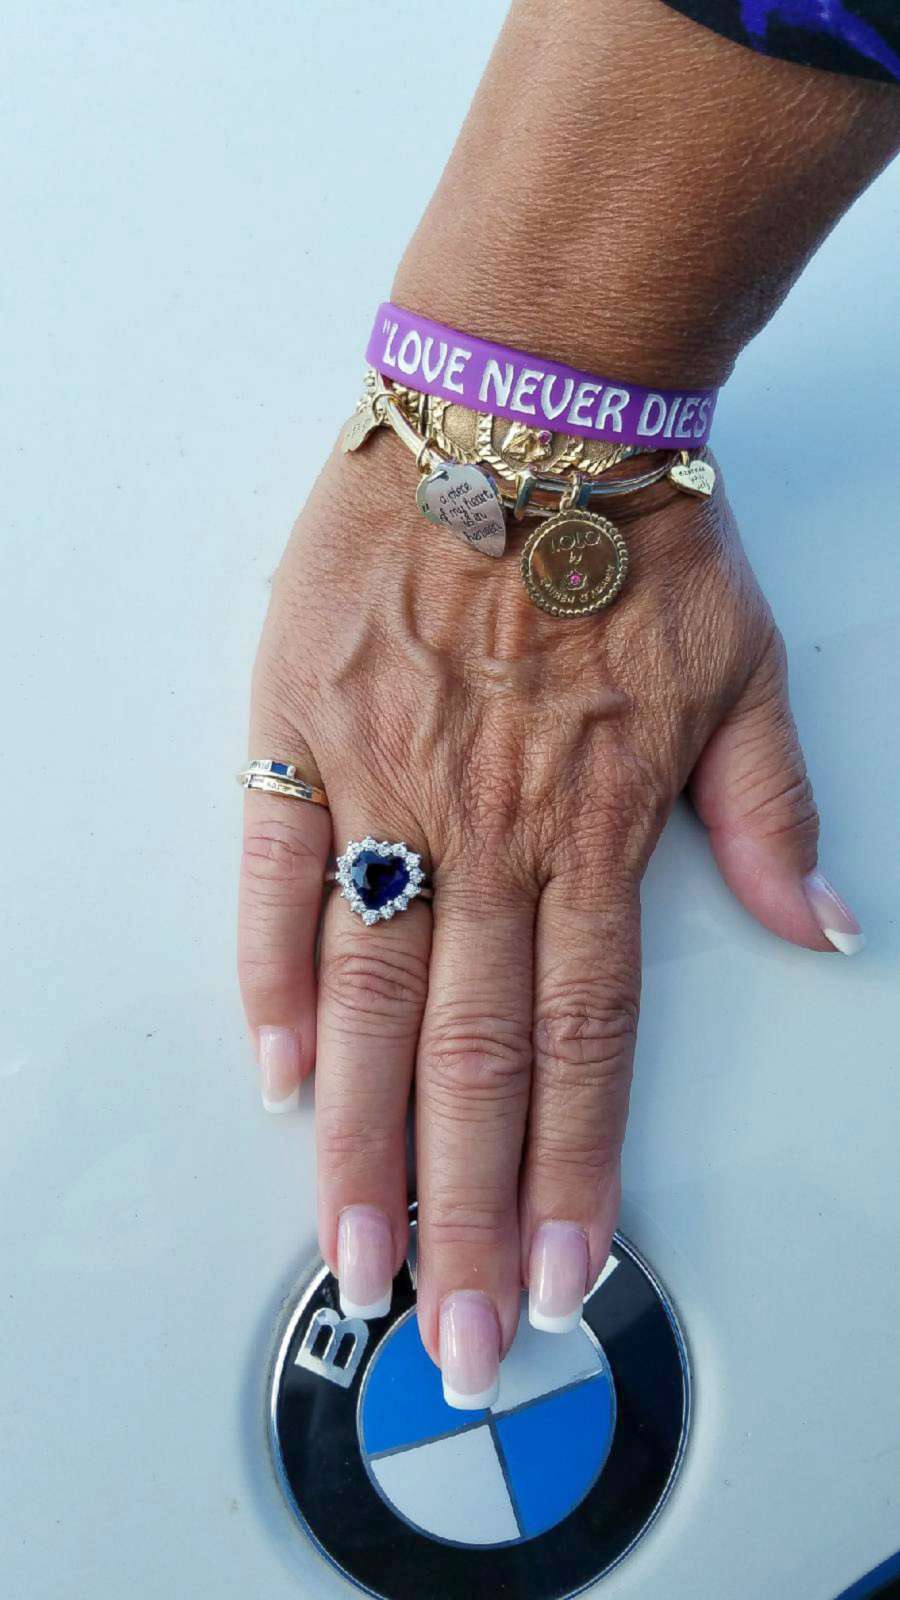 PHOTO: Sara Lopez was reunited with the sentimental ring honoring her late son, David, lost at his favorite beach. 